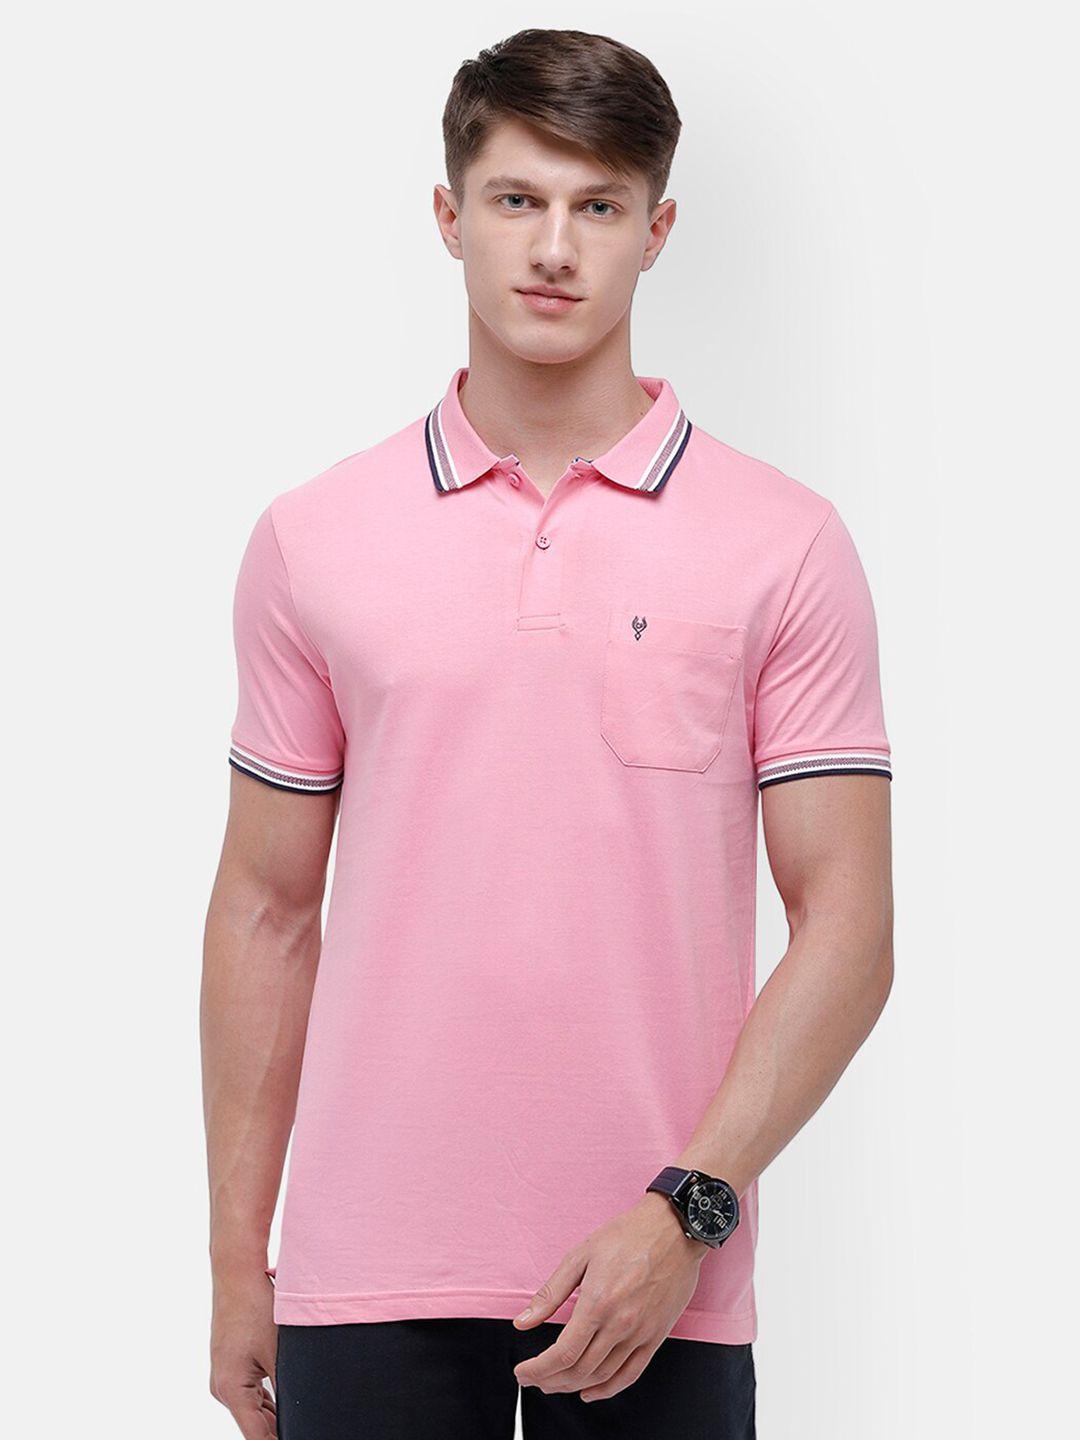 classic-polo-men-pink-polo-collar-slim-fit-t-shirt